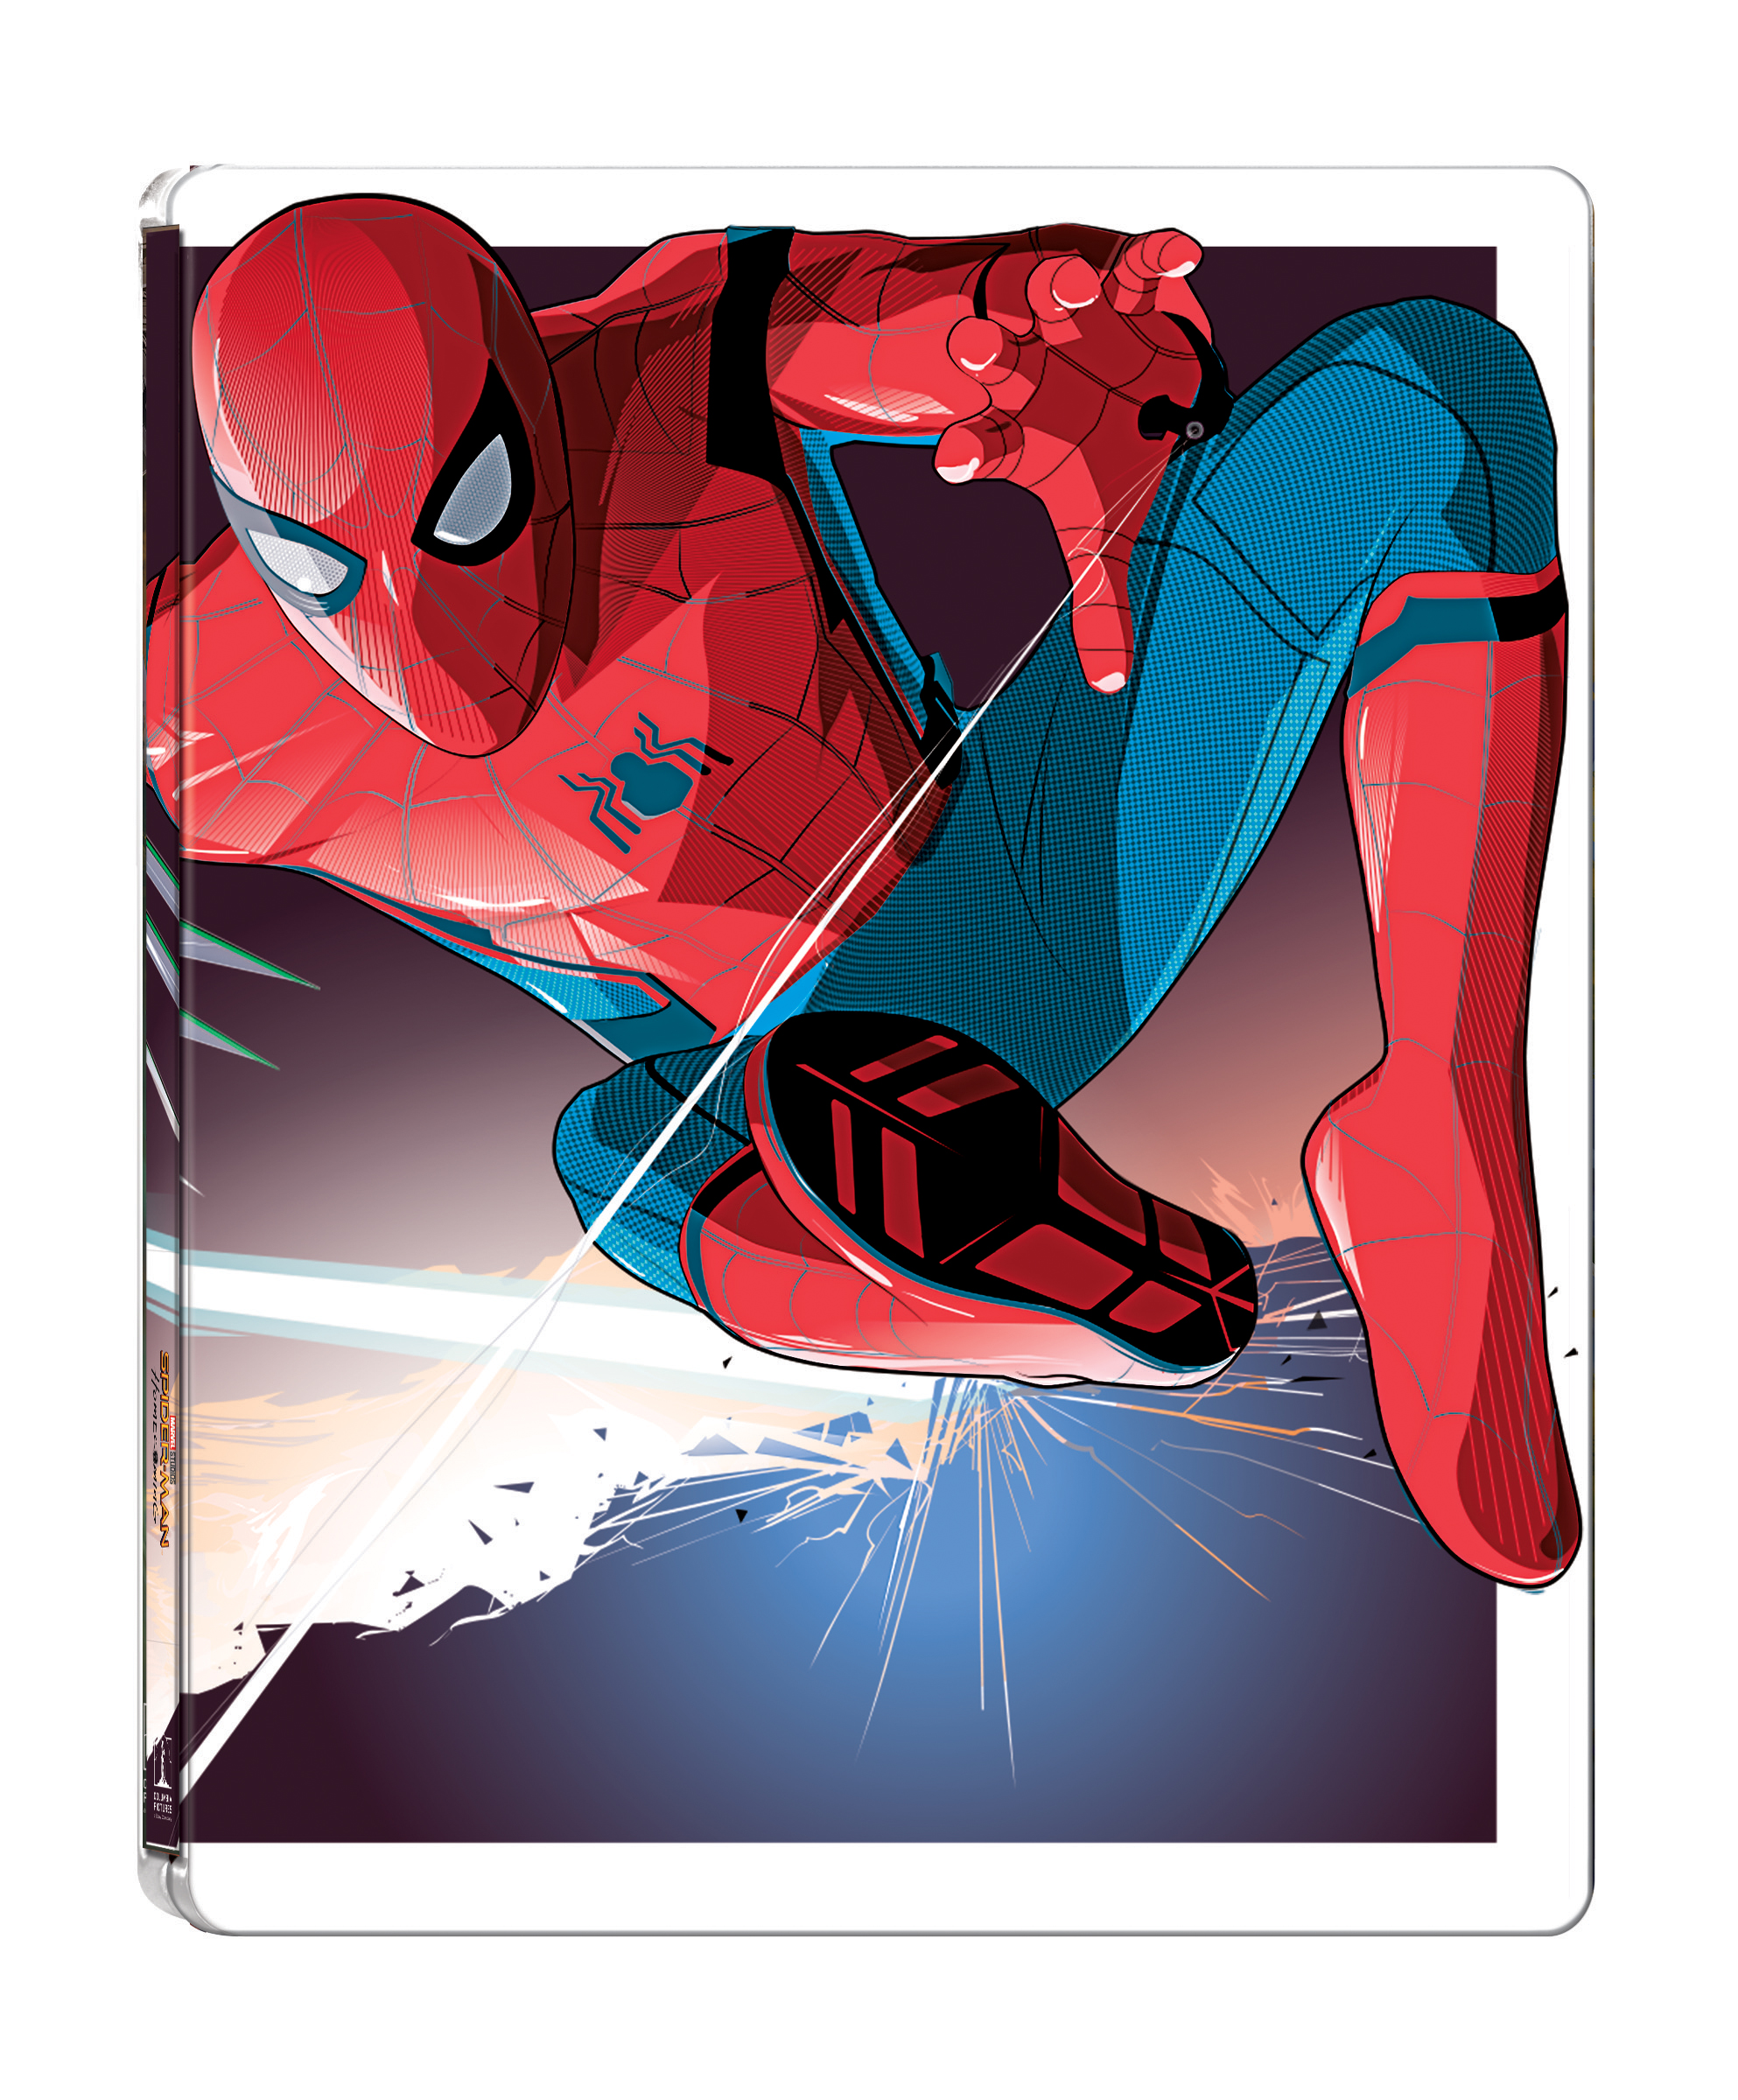 [Blu-ray] Spider-Man: Homecoming(4K UHD+BD:2Disc) Steelbook Limited Edition